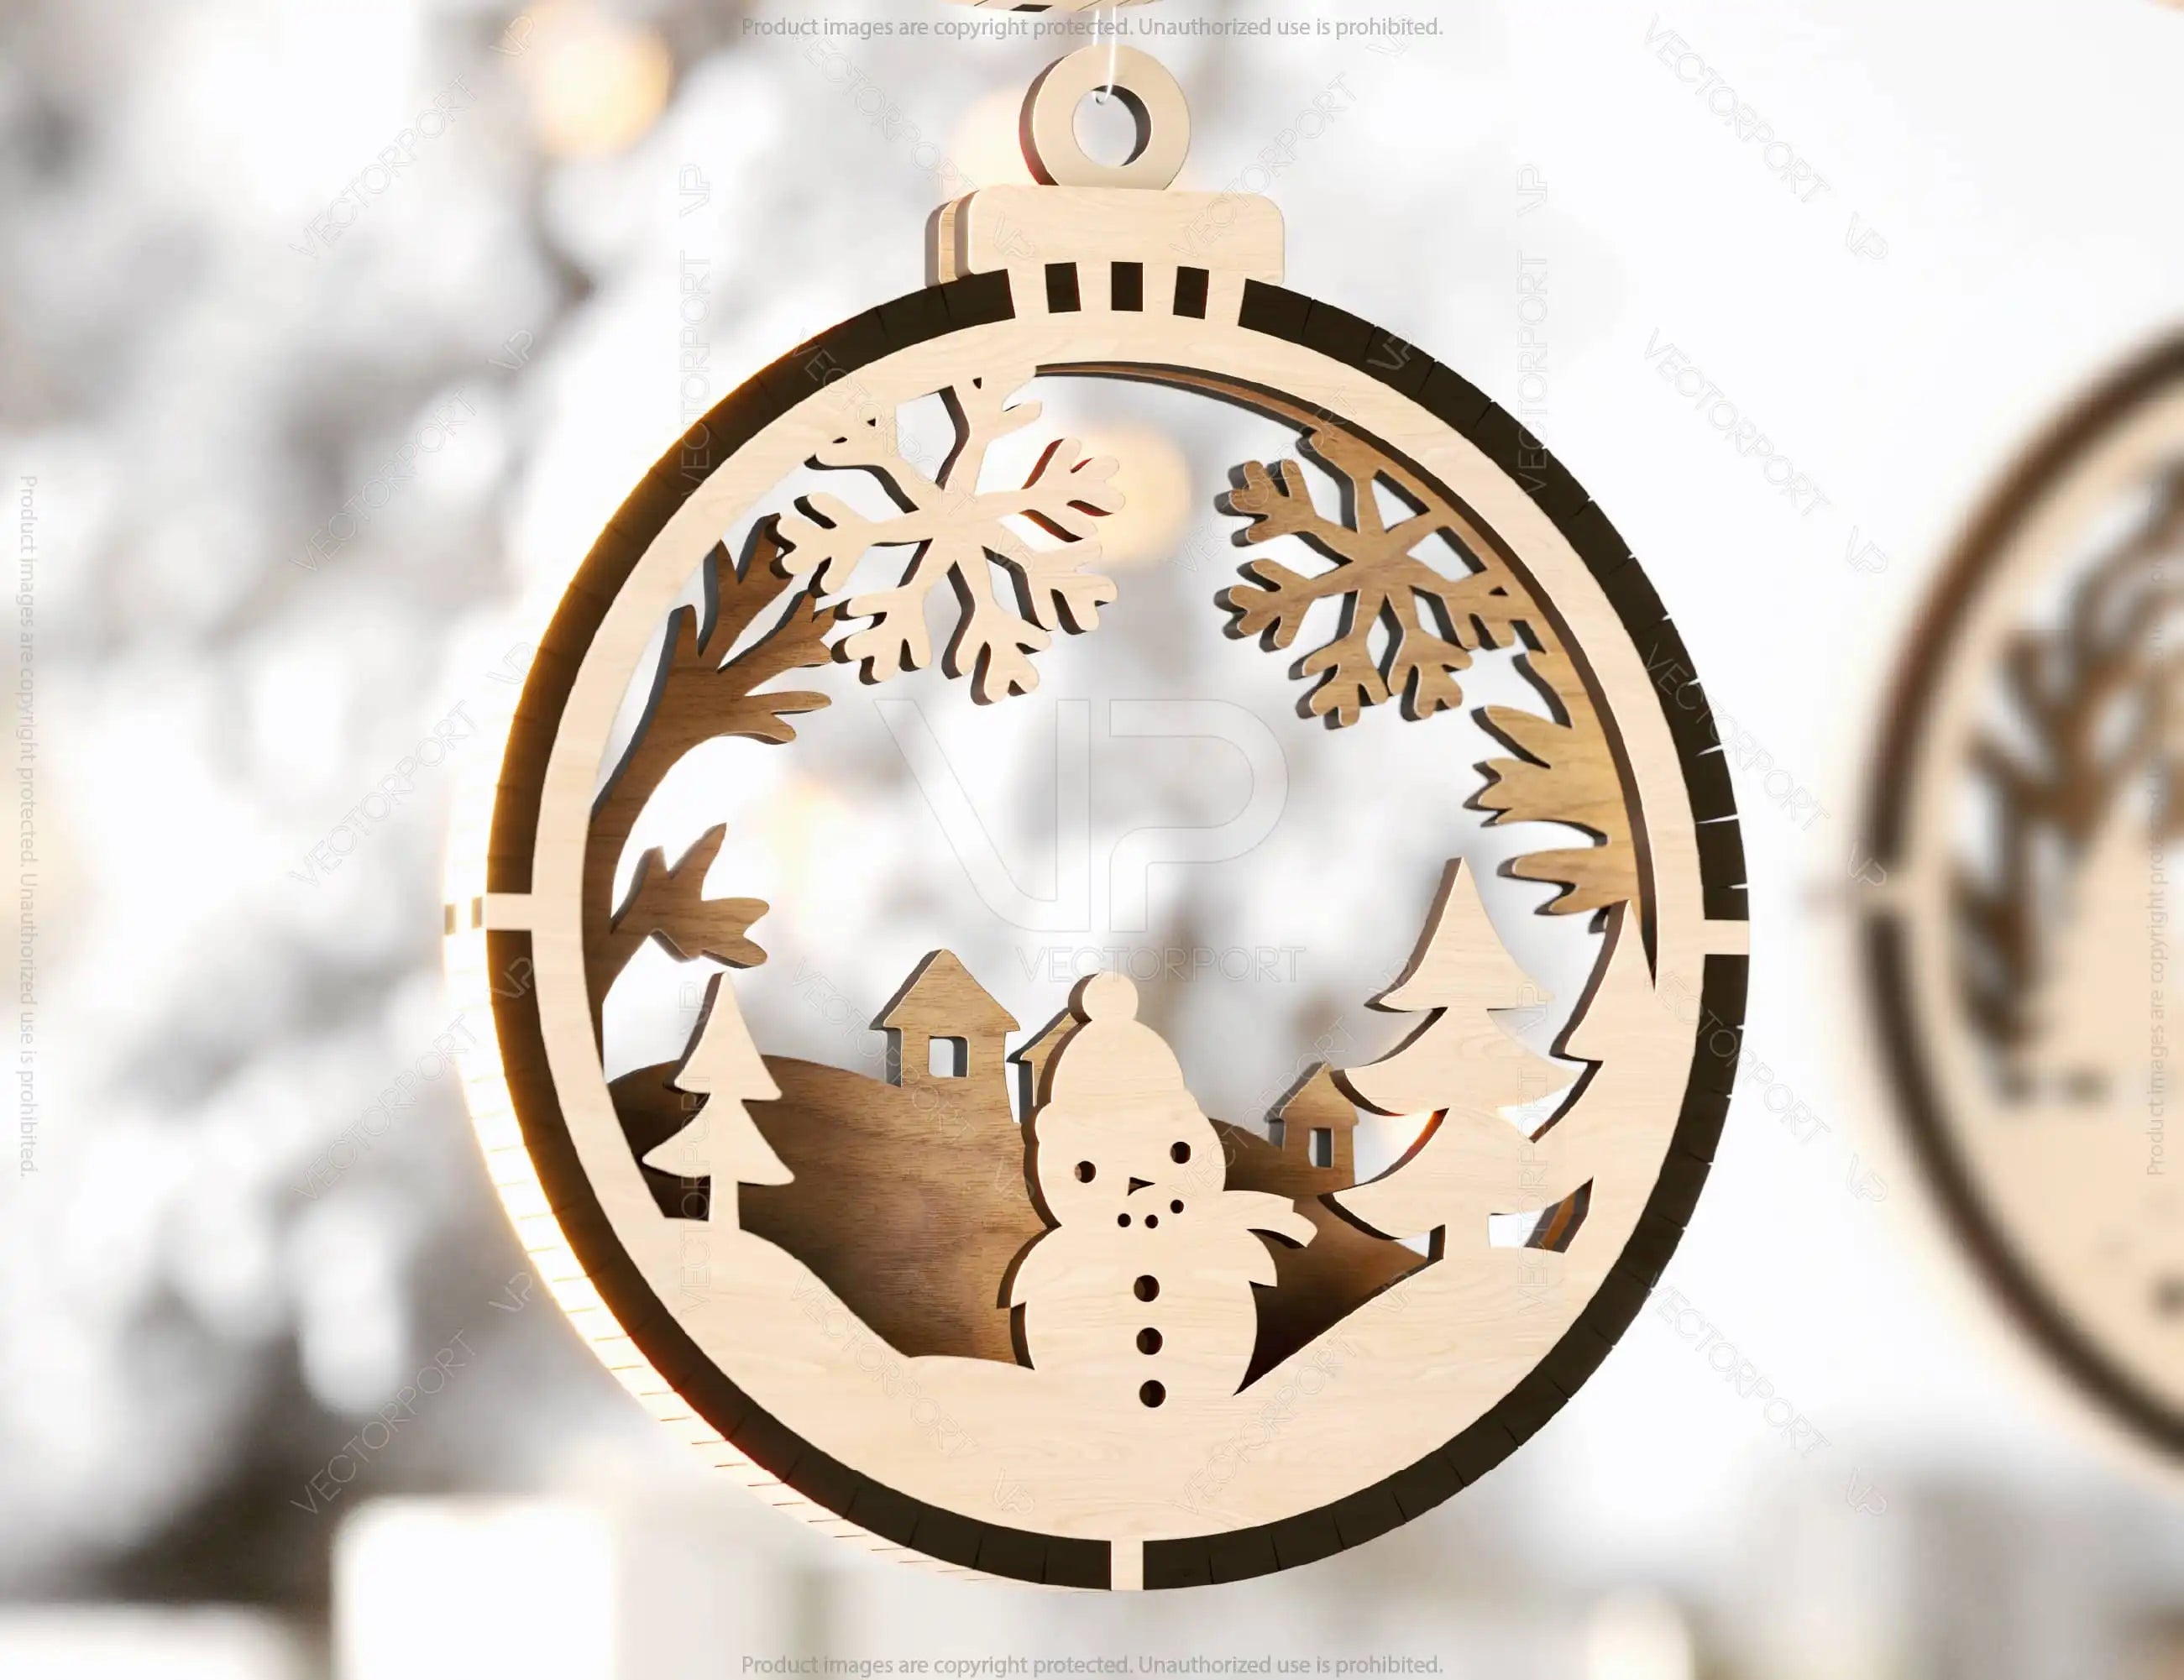 Christmas Theme 3D Christmas Ornament Set Tree Decorations Craft Hanging Bauble Snowy Scene New Year Holiday Laser Cut Digital Download |#U437|